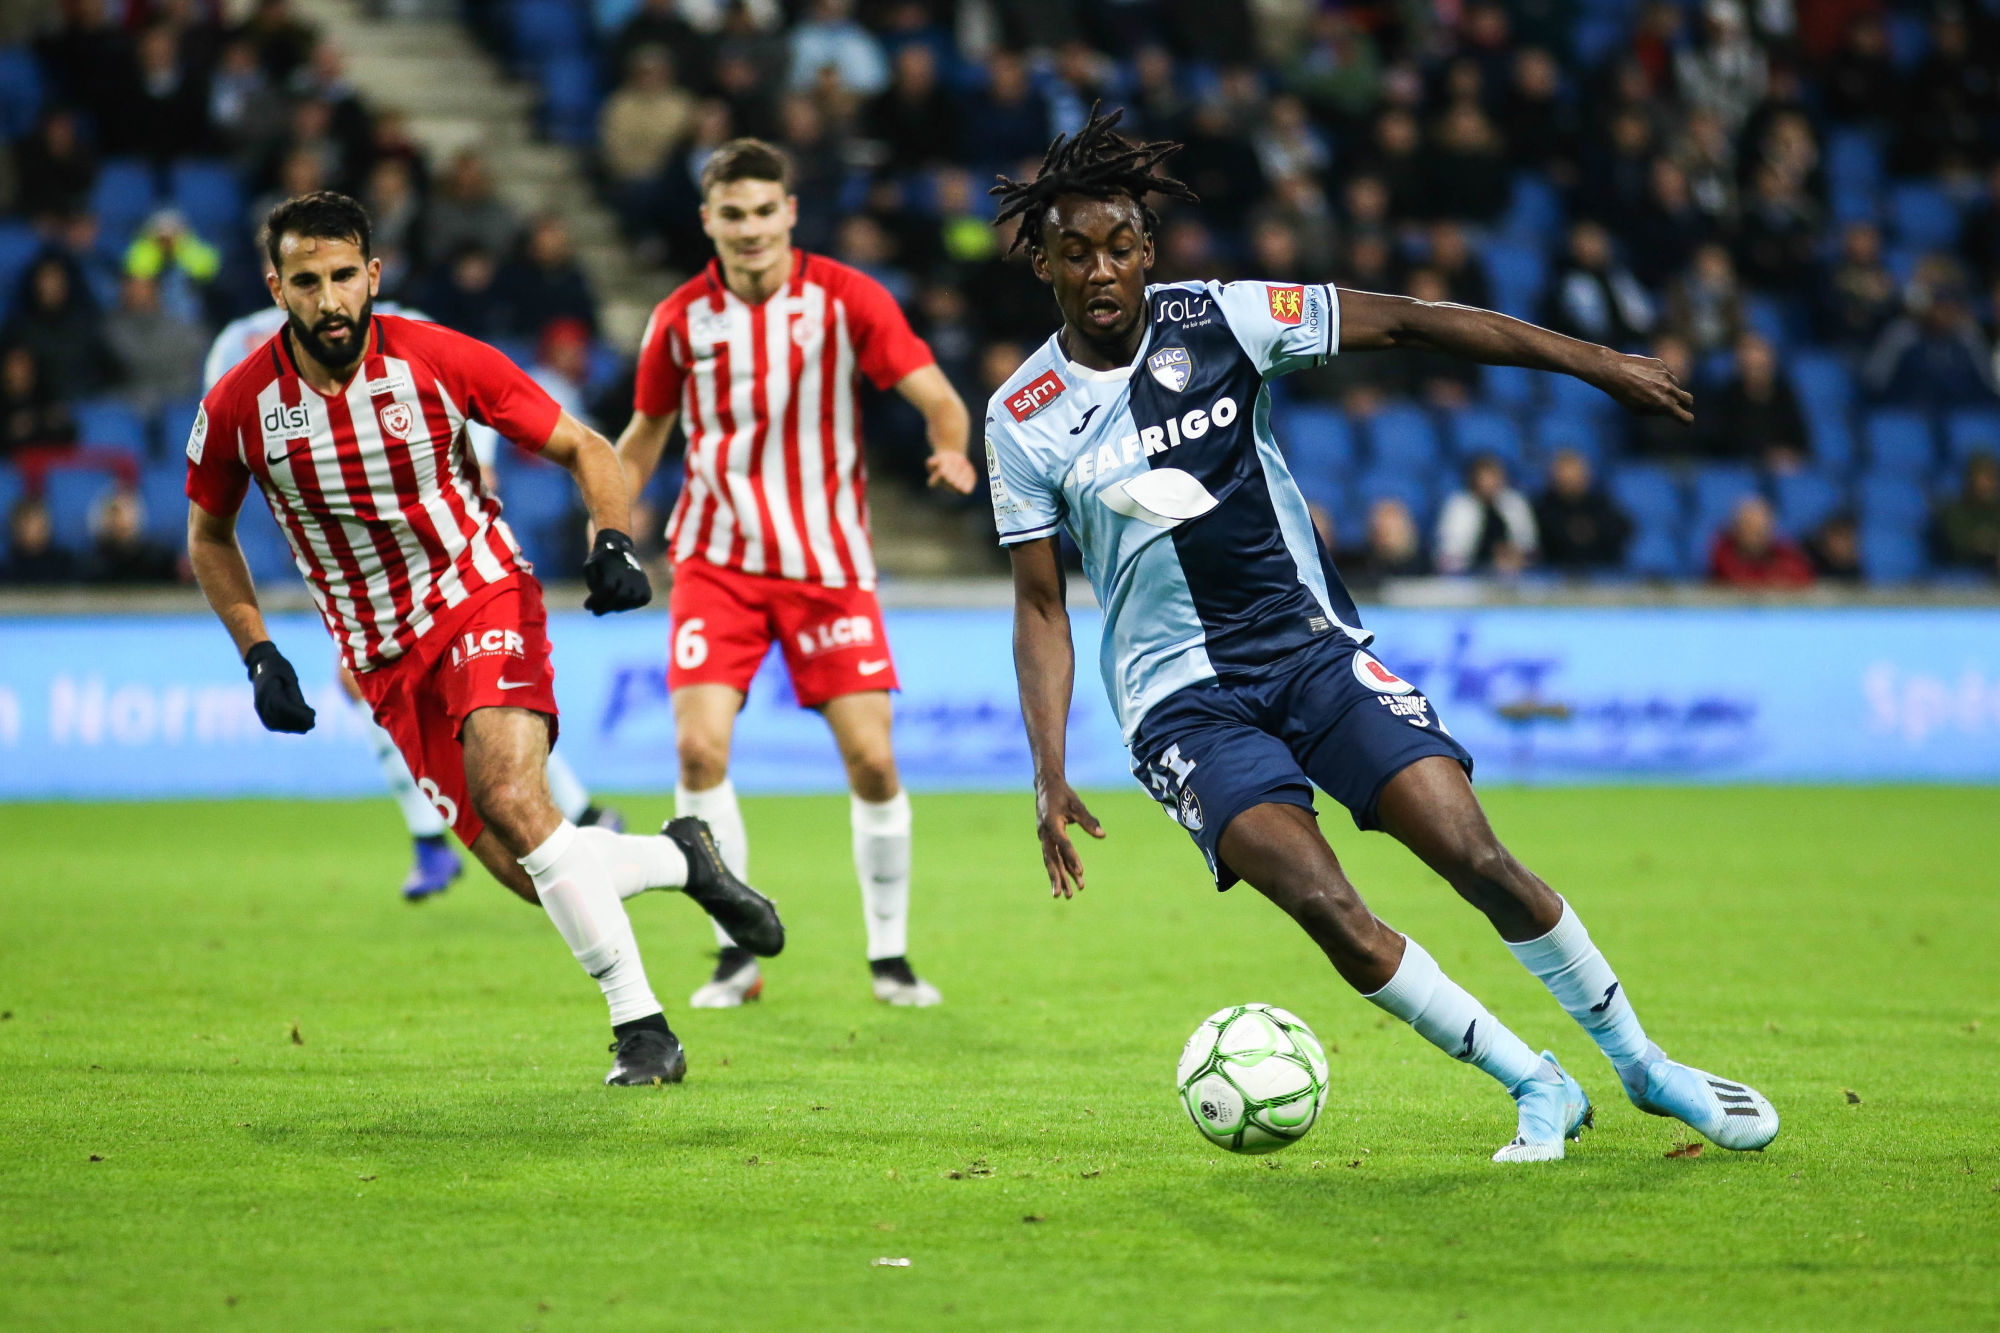 Tino KADEWERE of Le Havre during the Ligue 2 match between Le Havre and Nancy at Stade Oceane on November 4, 2019 in Le Havre, France. (Photo by Maxime Le Pihif/Icon Sport) - Tino KADEWERE - Stade Oceane - Le Havre (France)